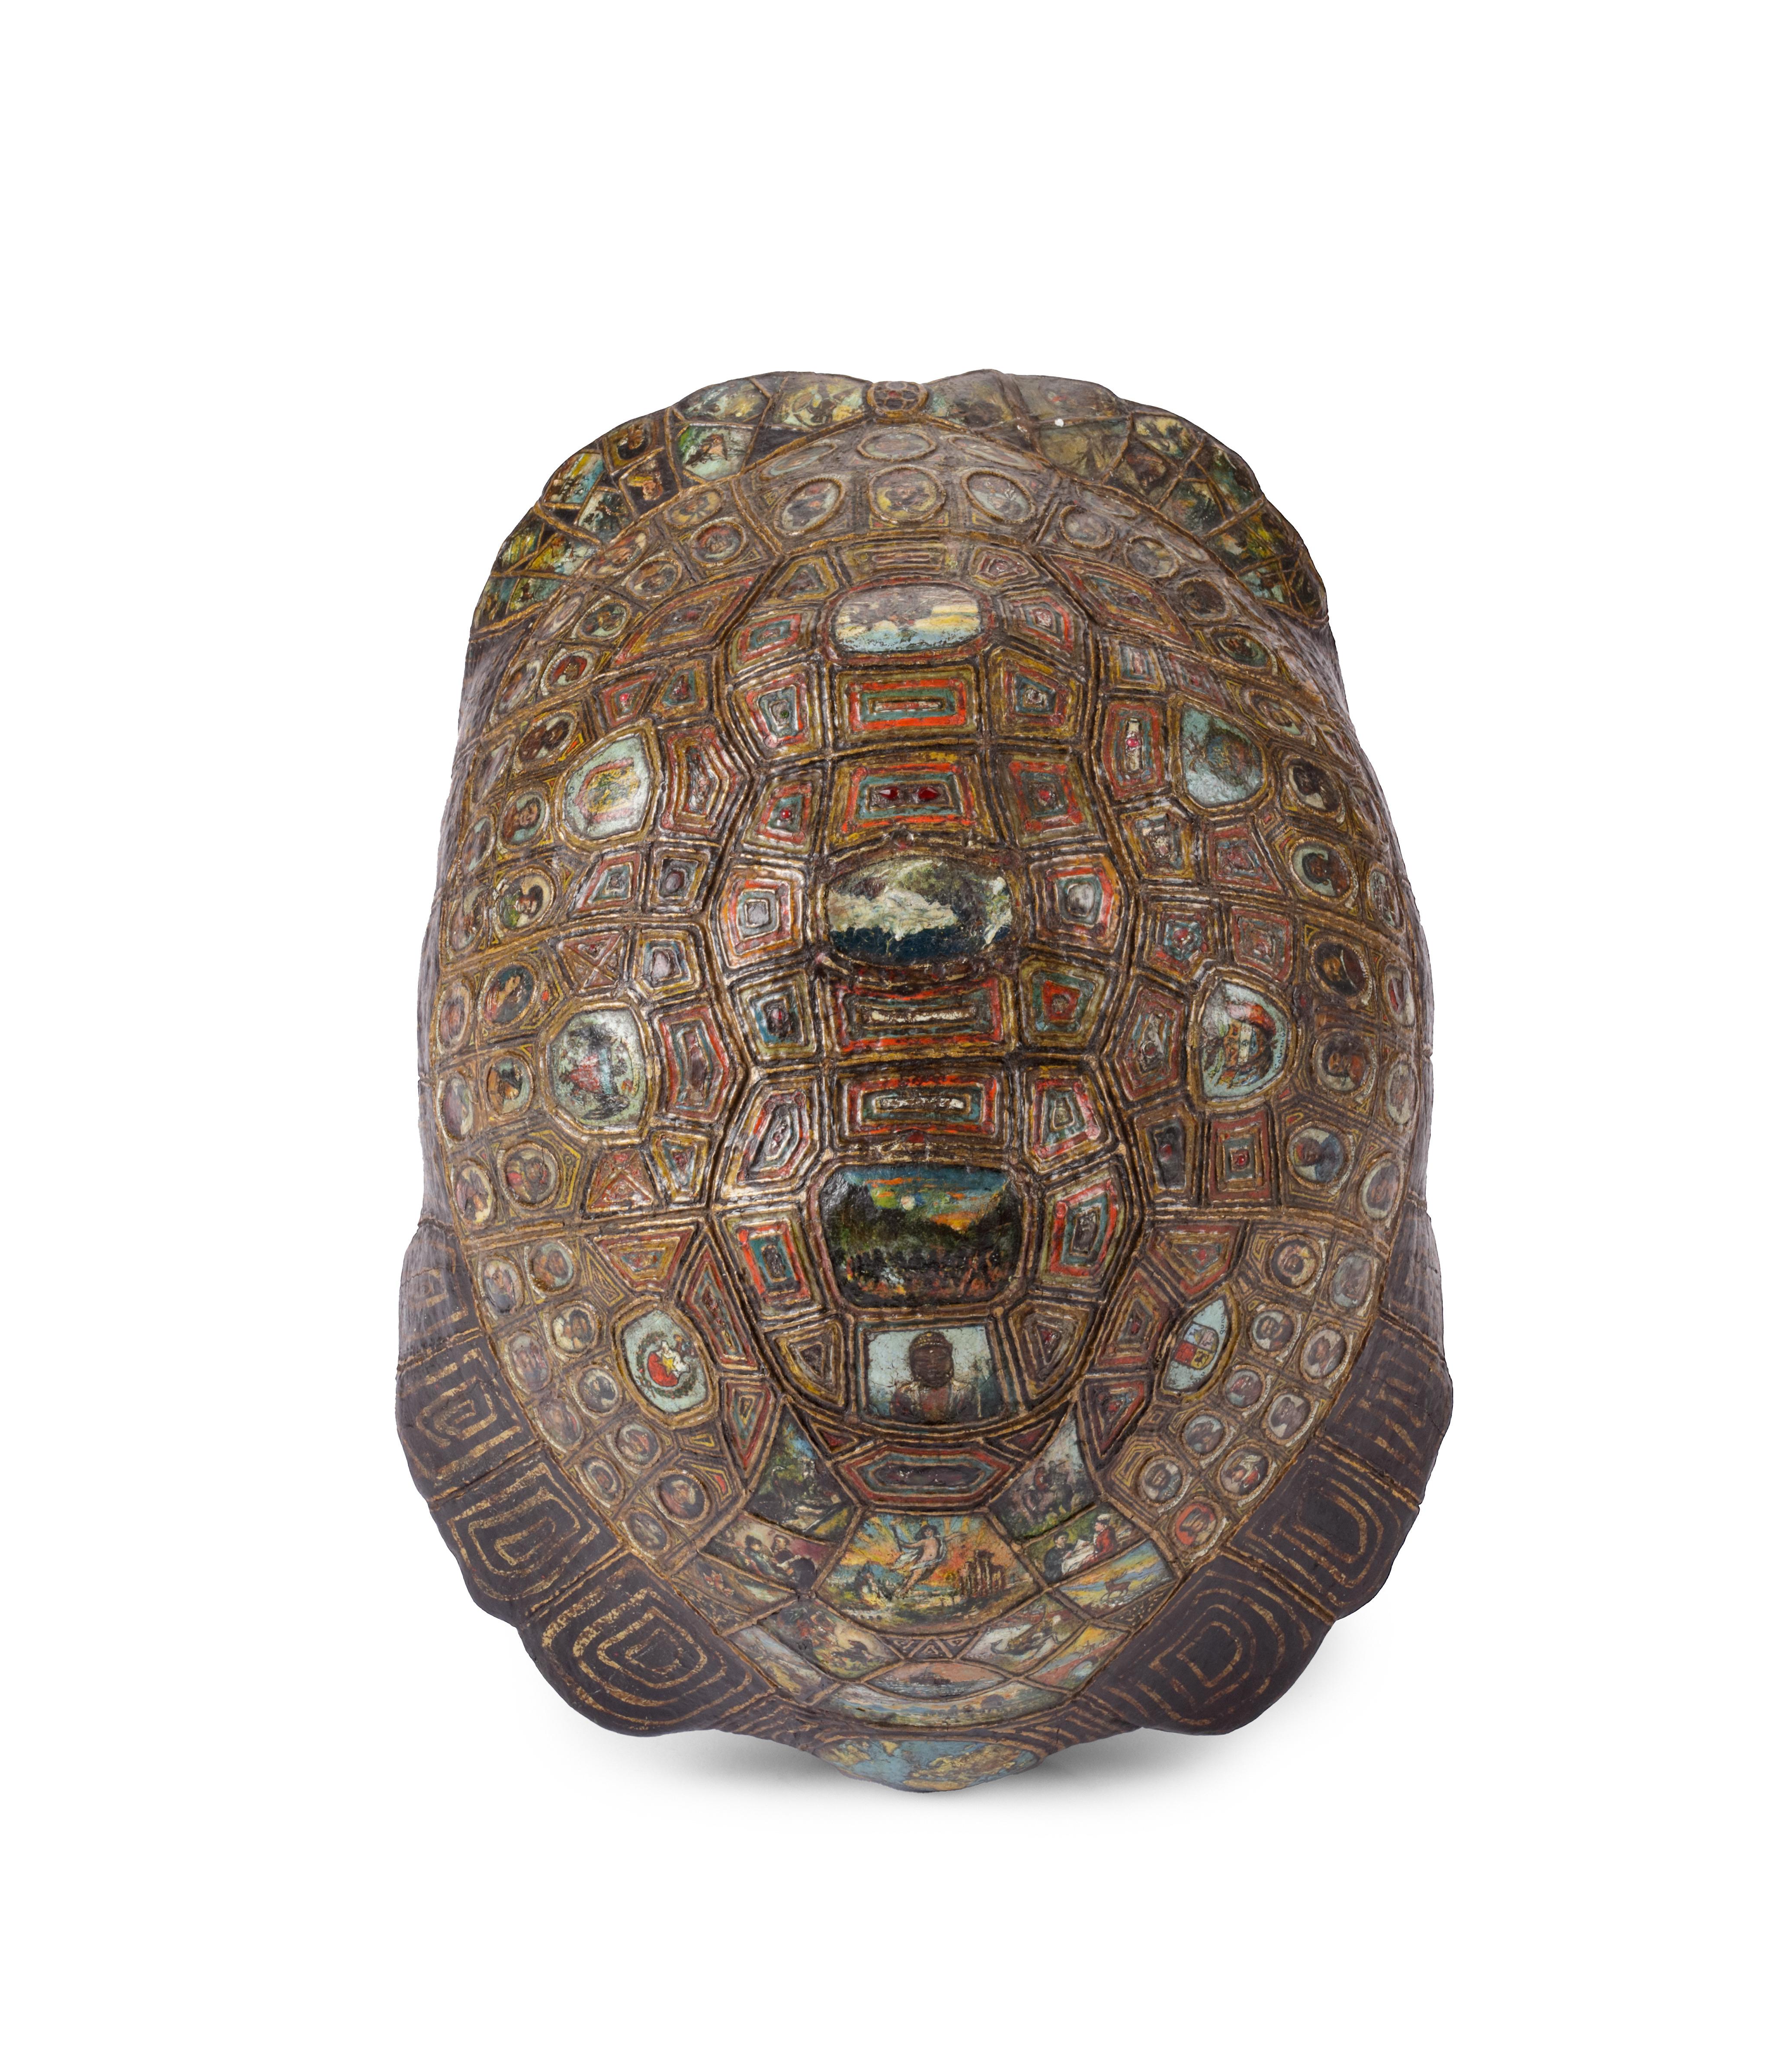 A highly unusual carved painted, gilt and gem-set tortoise carapace resembling the mythical Cosmic or World-bearing Turtle

Probably Germany, late 19th century

L. 32 x W. 26 x H. 20 cm

Provenance:
Private collection, Munich

Following the natural